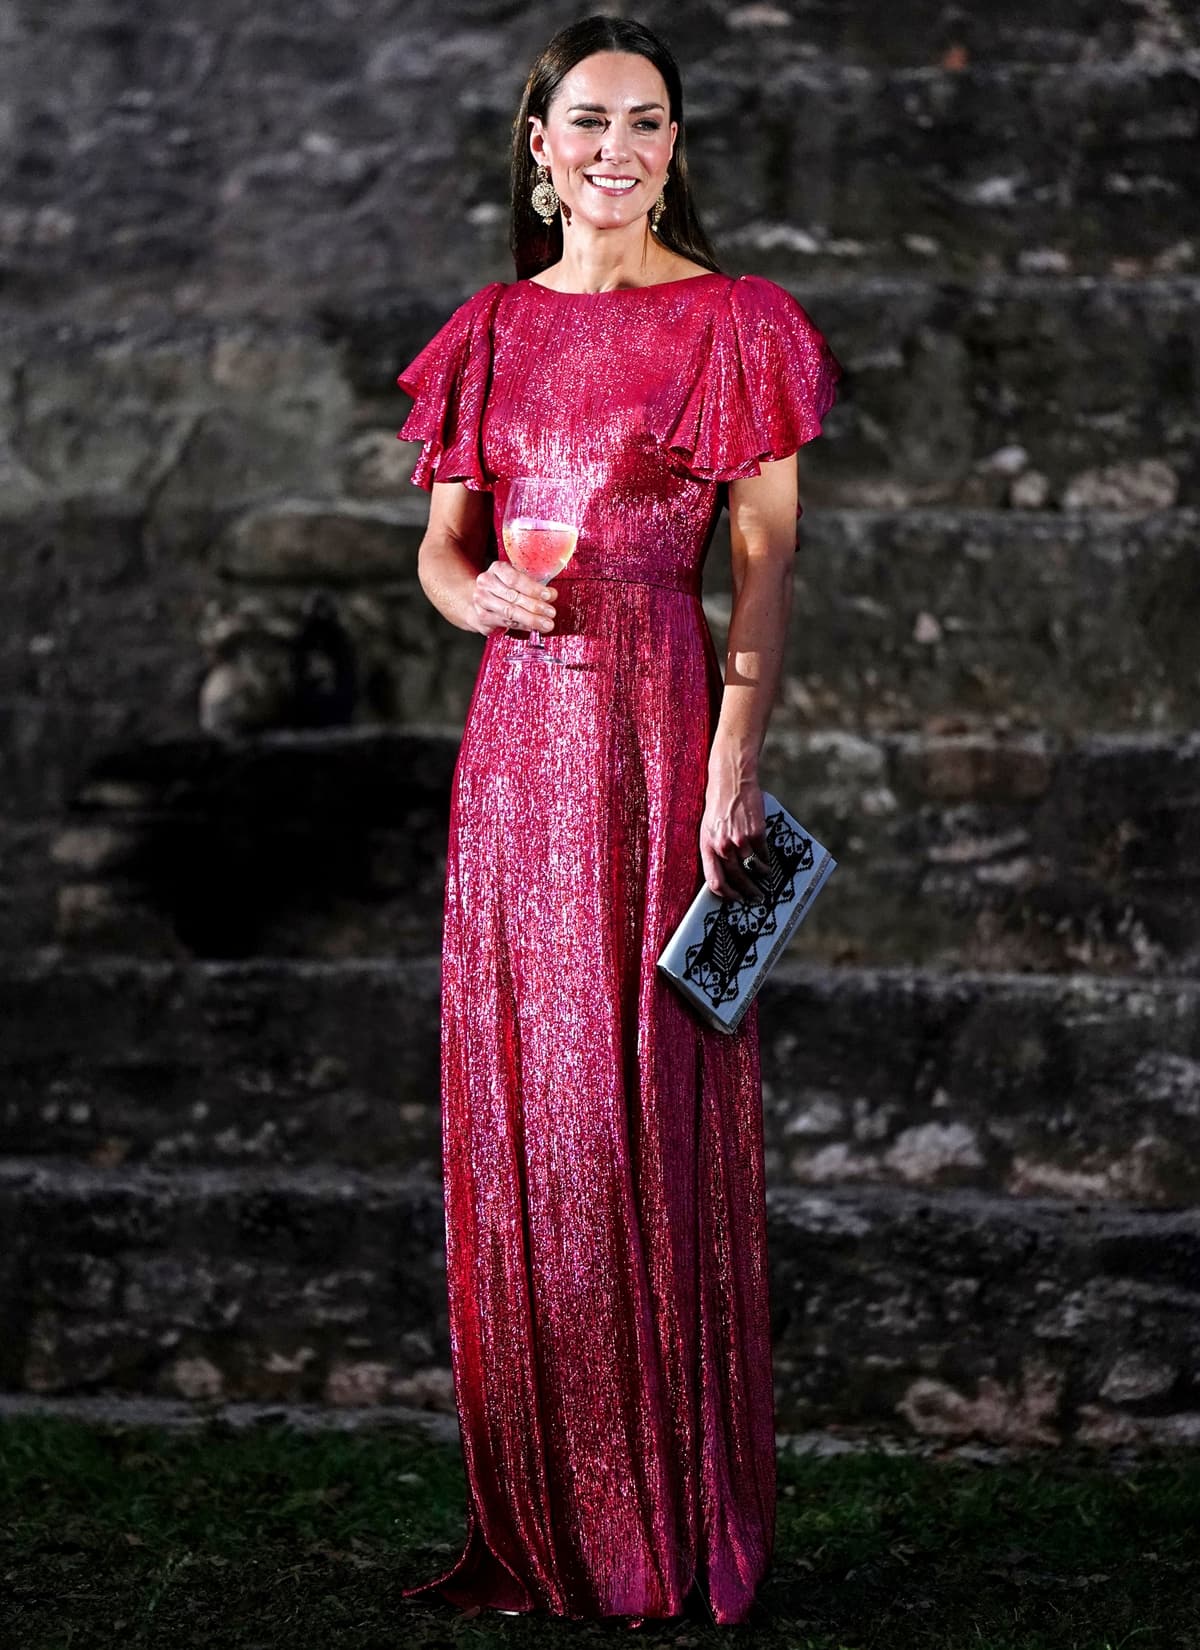 Kate Middleton shimmered in a hot pink dress from the popular British label The Vampire's Wife